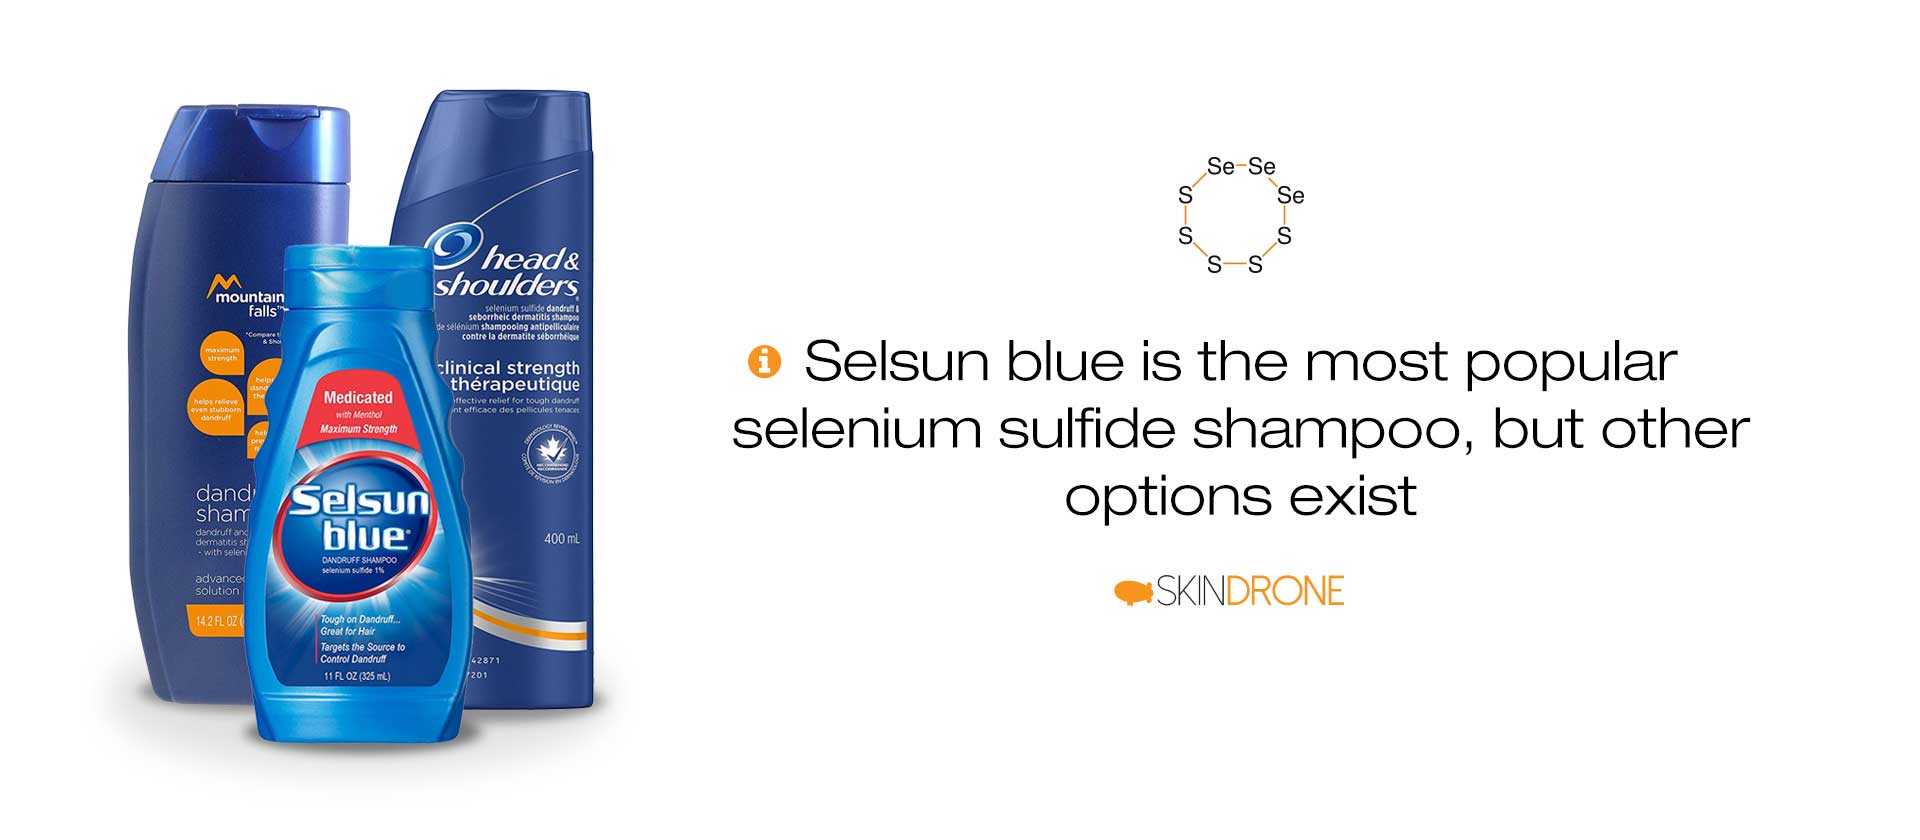 Three common selenium sulfide shampoos for scalp treatment - selsun blue in th middle